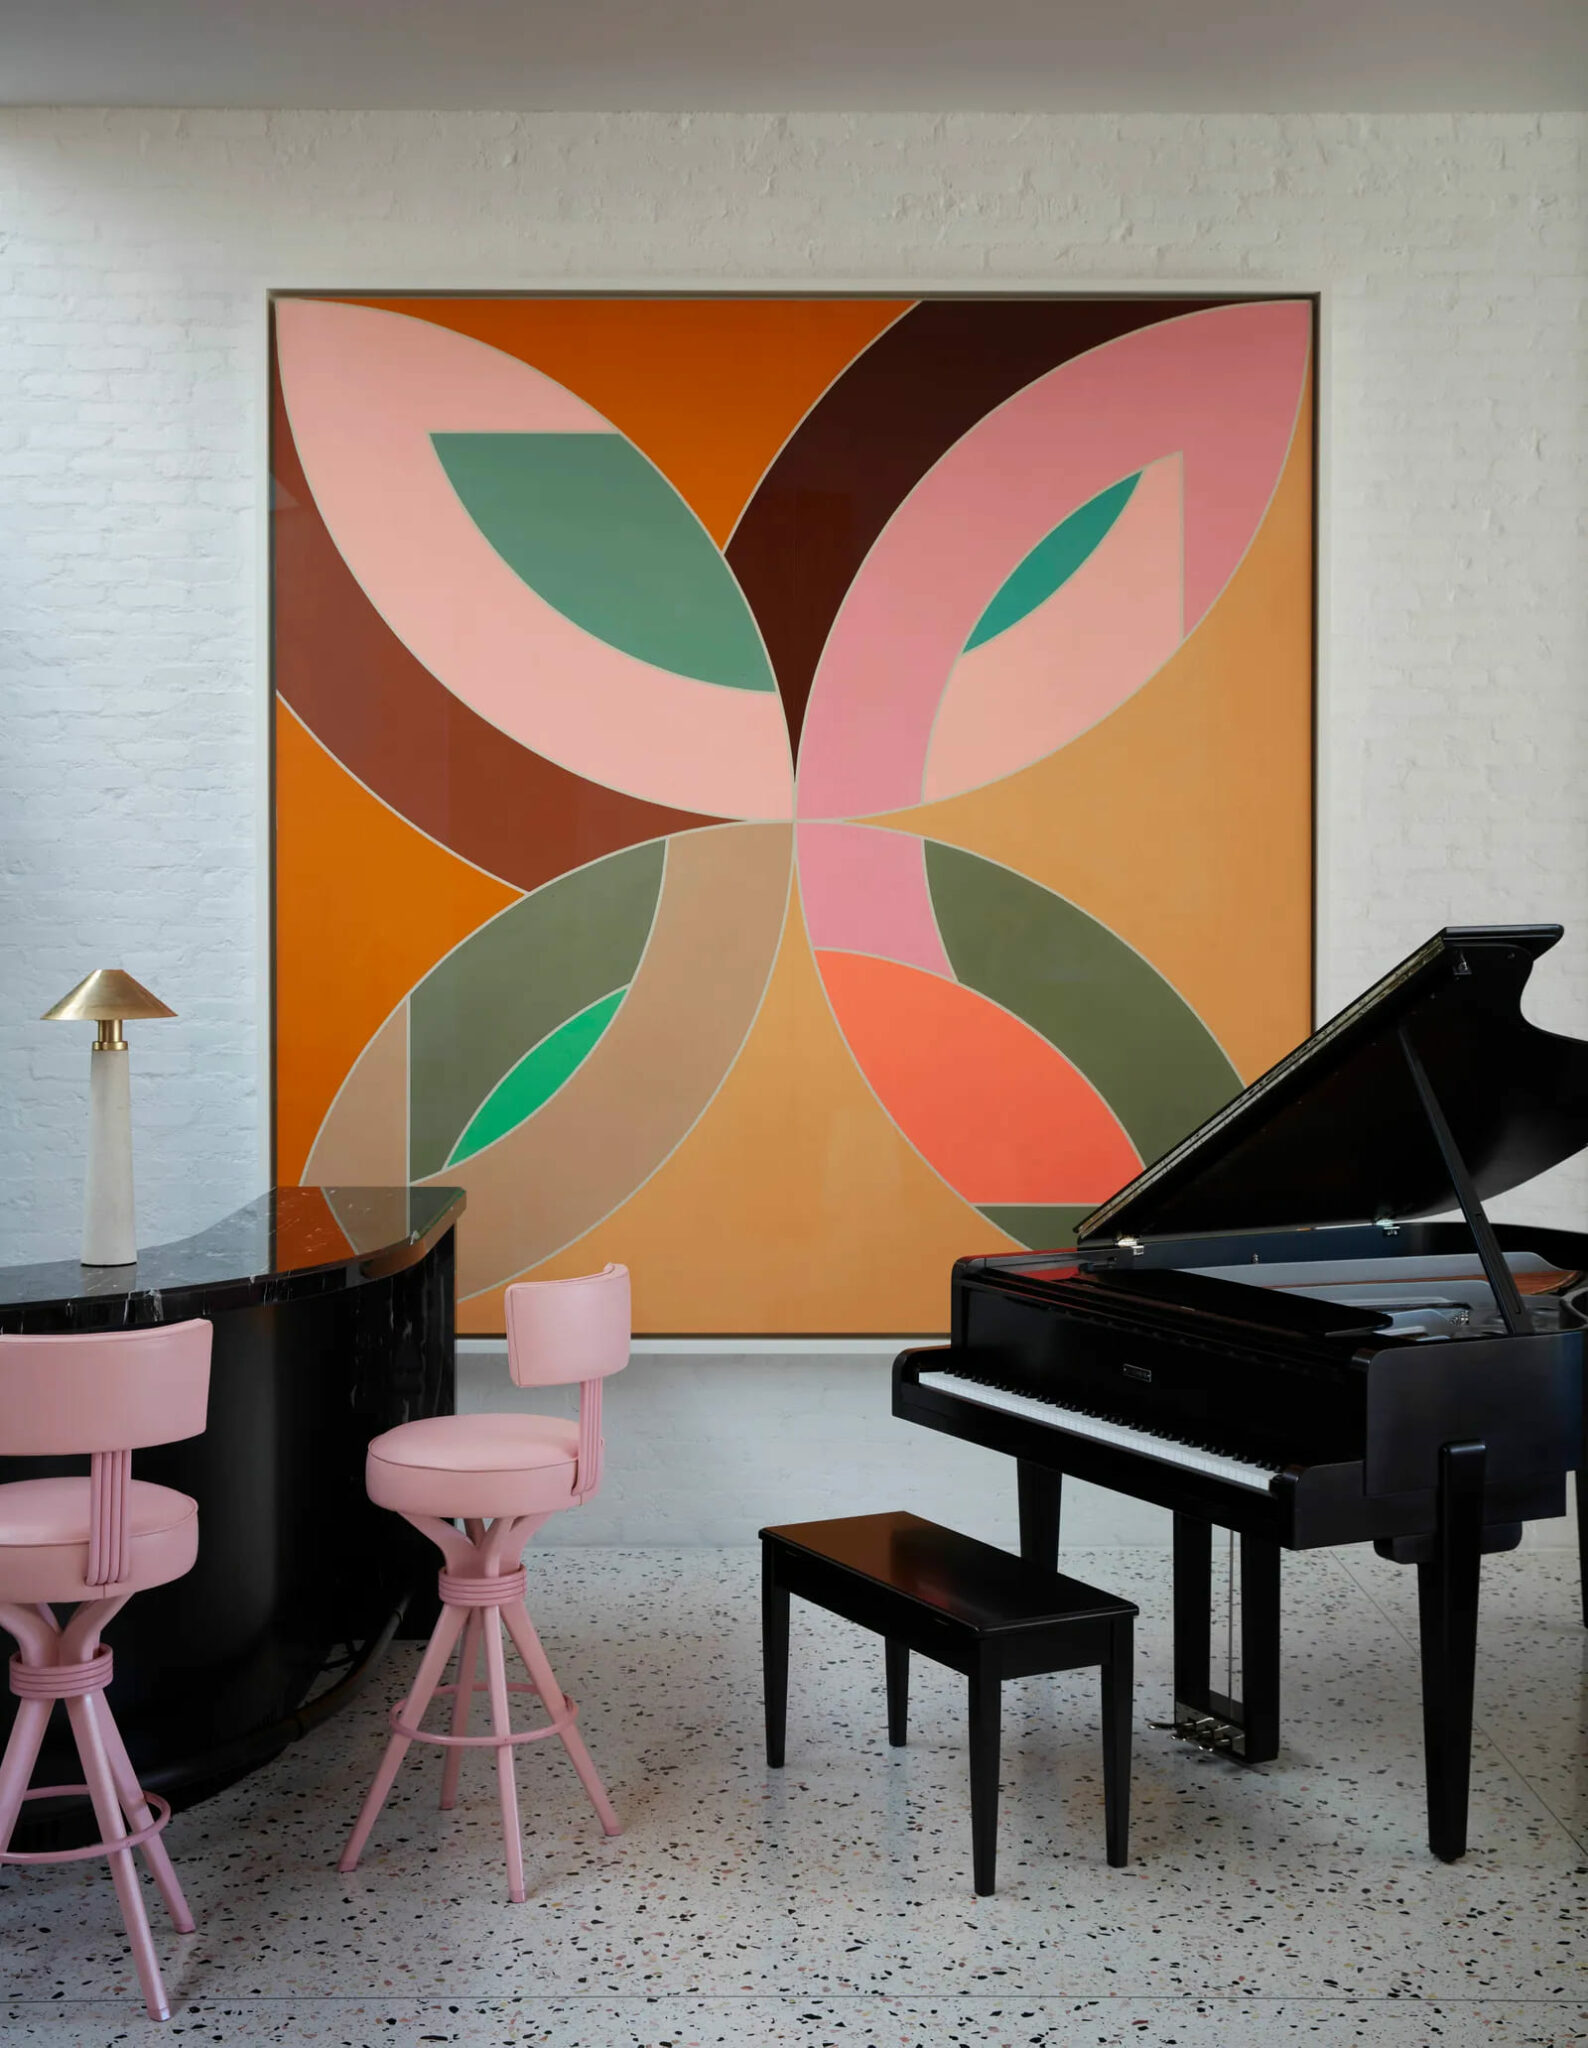 A grand piano next to a colorful painting and a bar with pink bar chairs